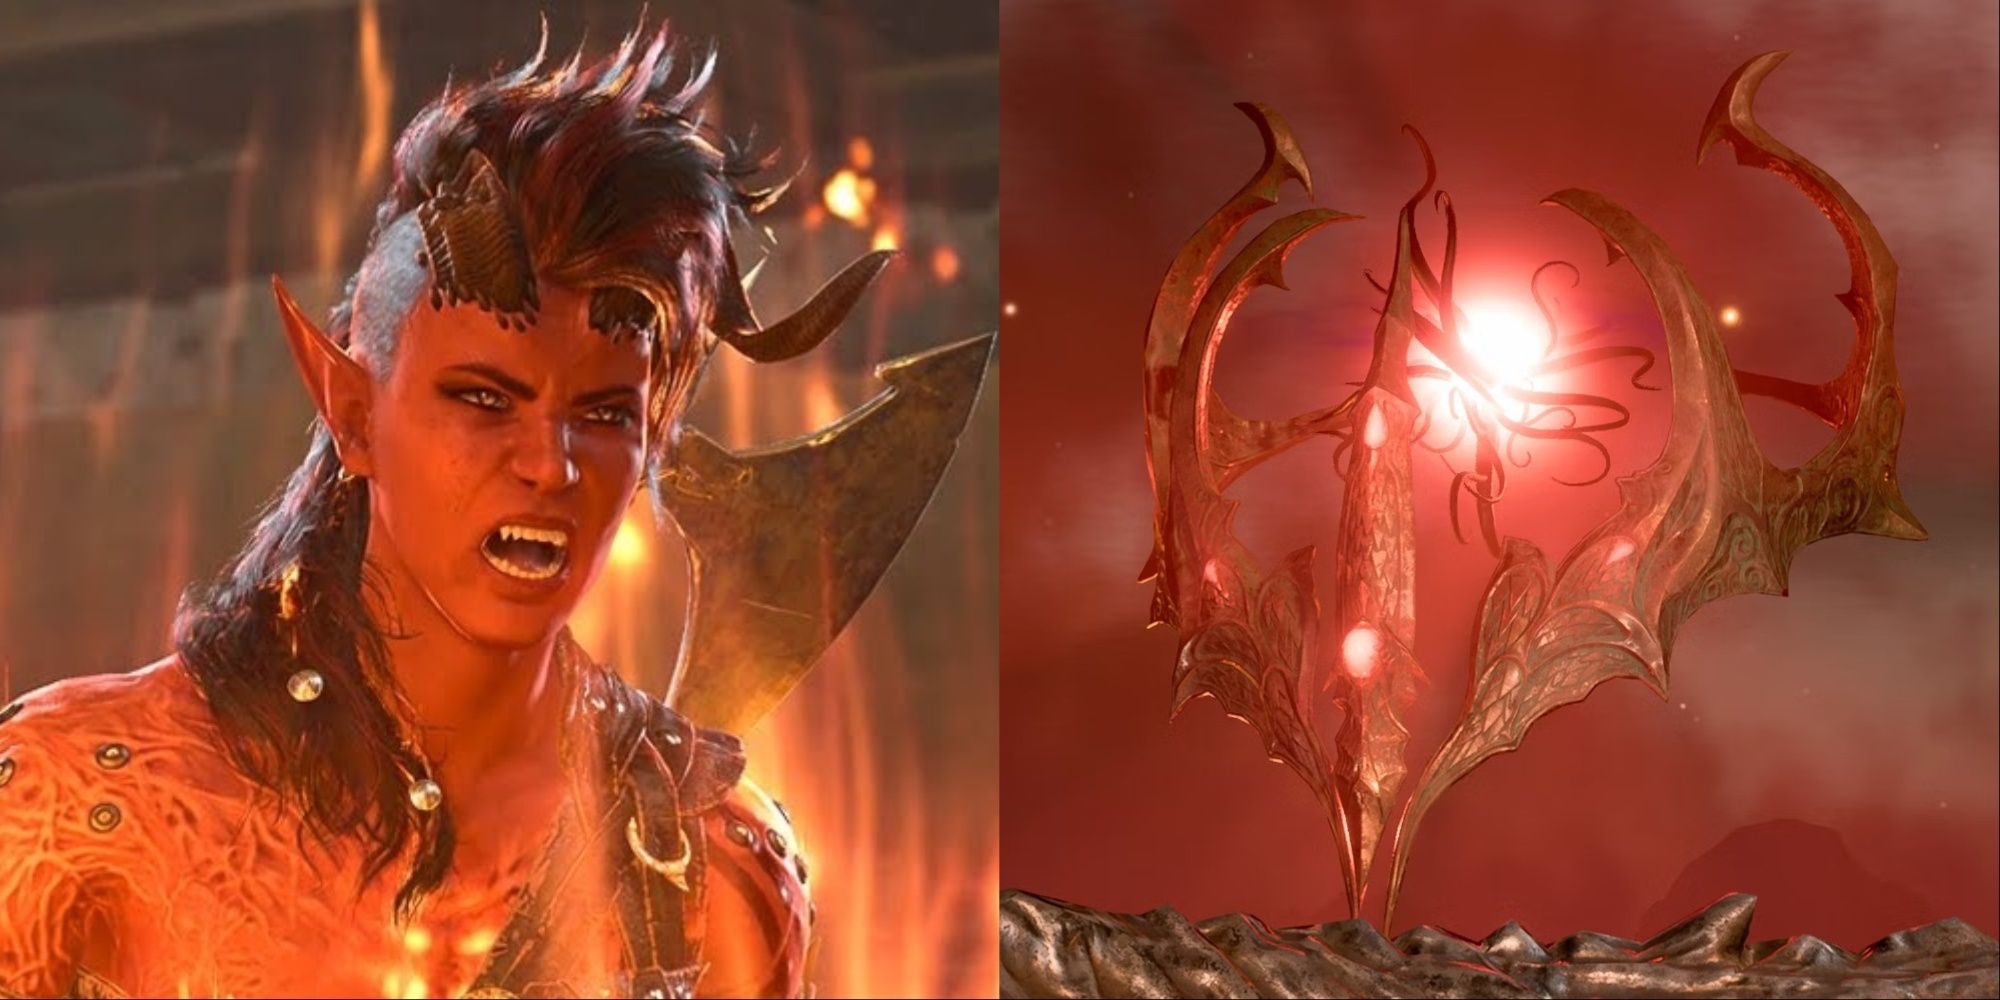 Split image showing a raging Karlach and the Crown of Karsus in baldur's gate 3